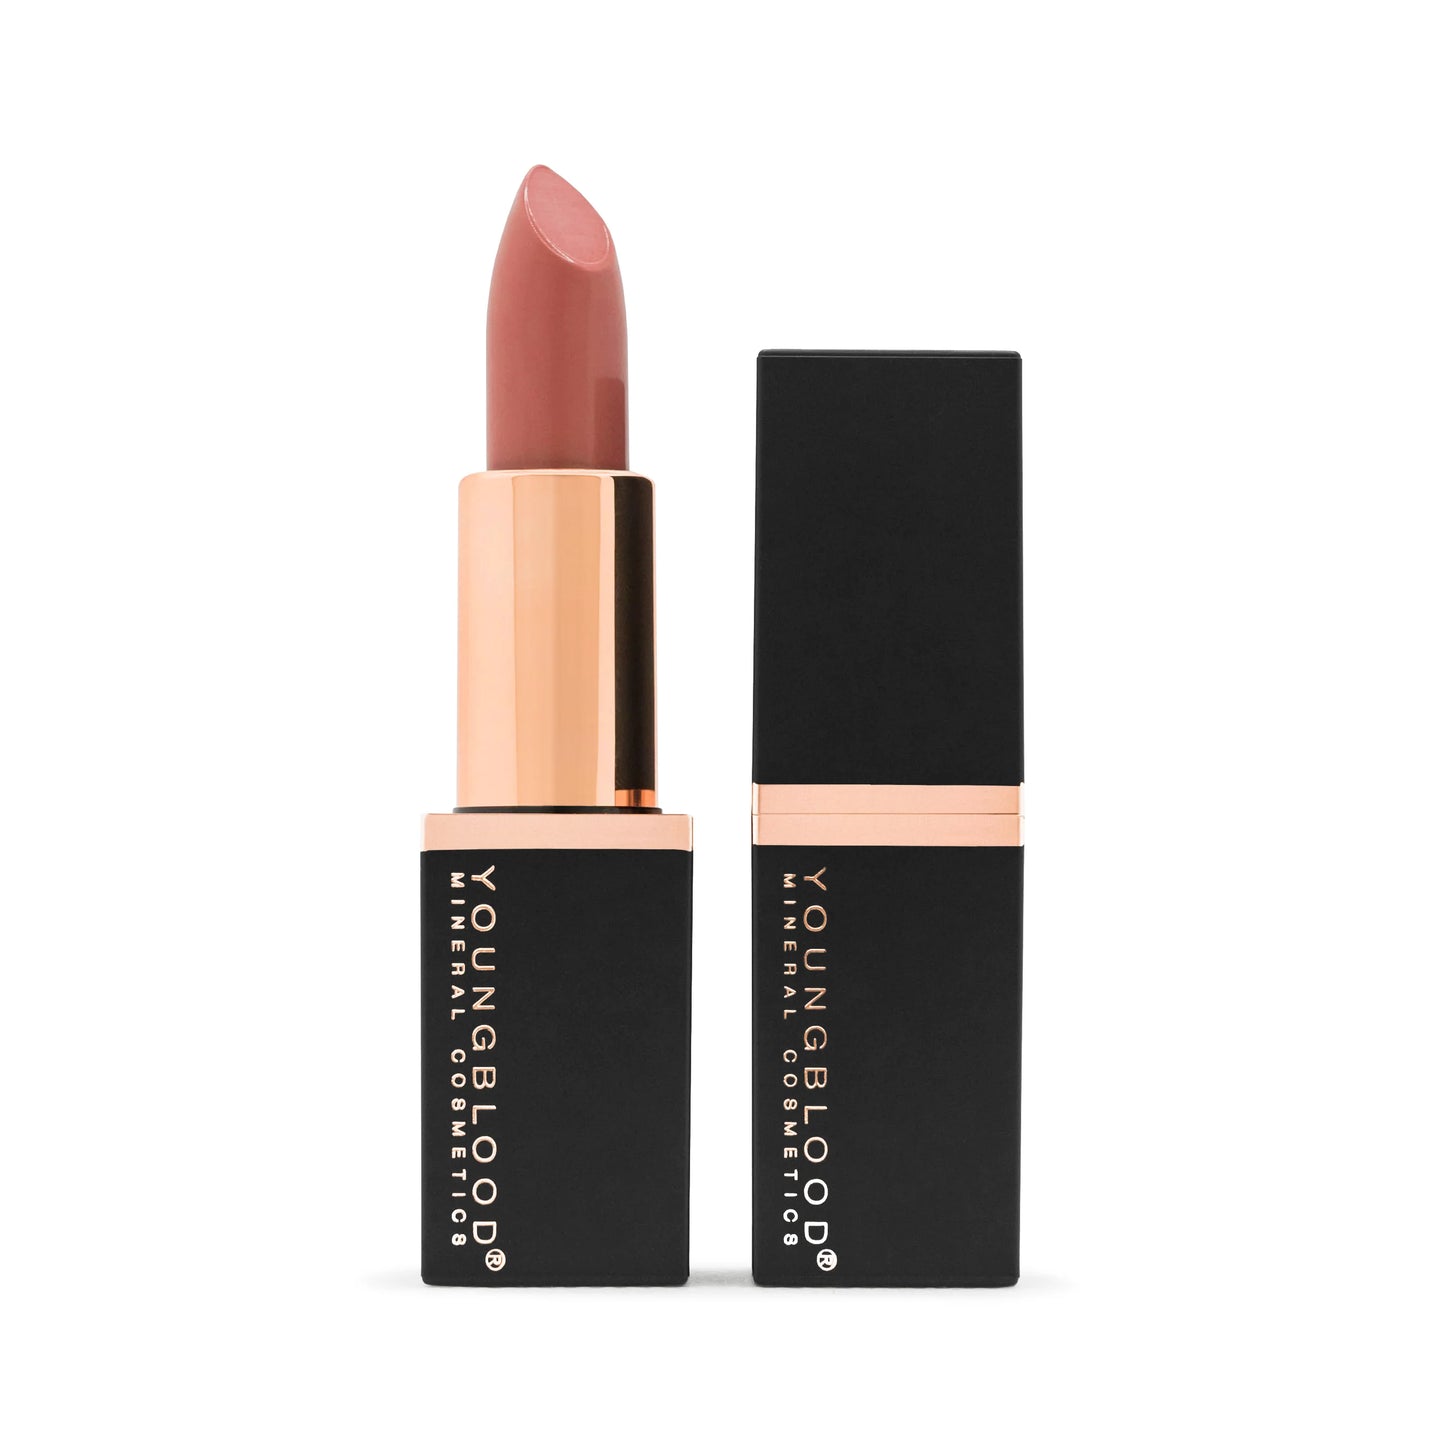 Youngblood Mineral Makeup Mineral Creme Lipstick